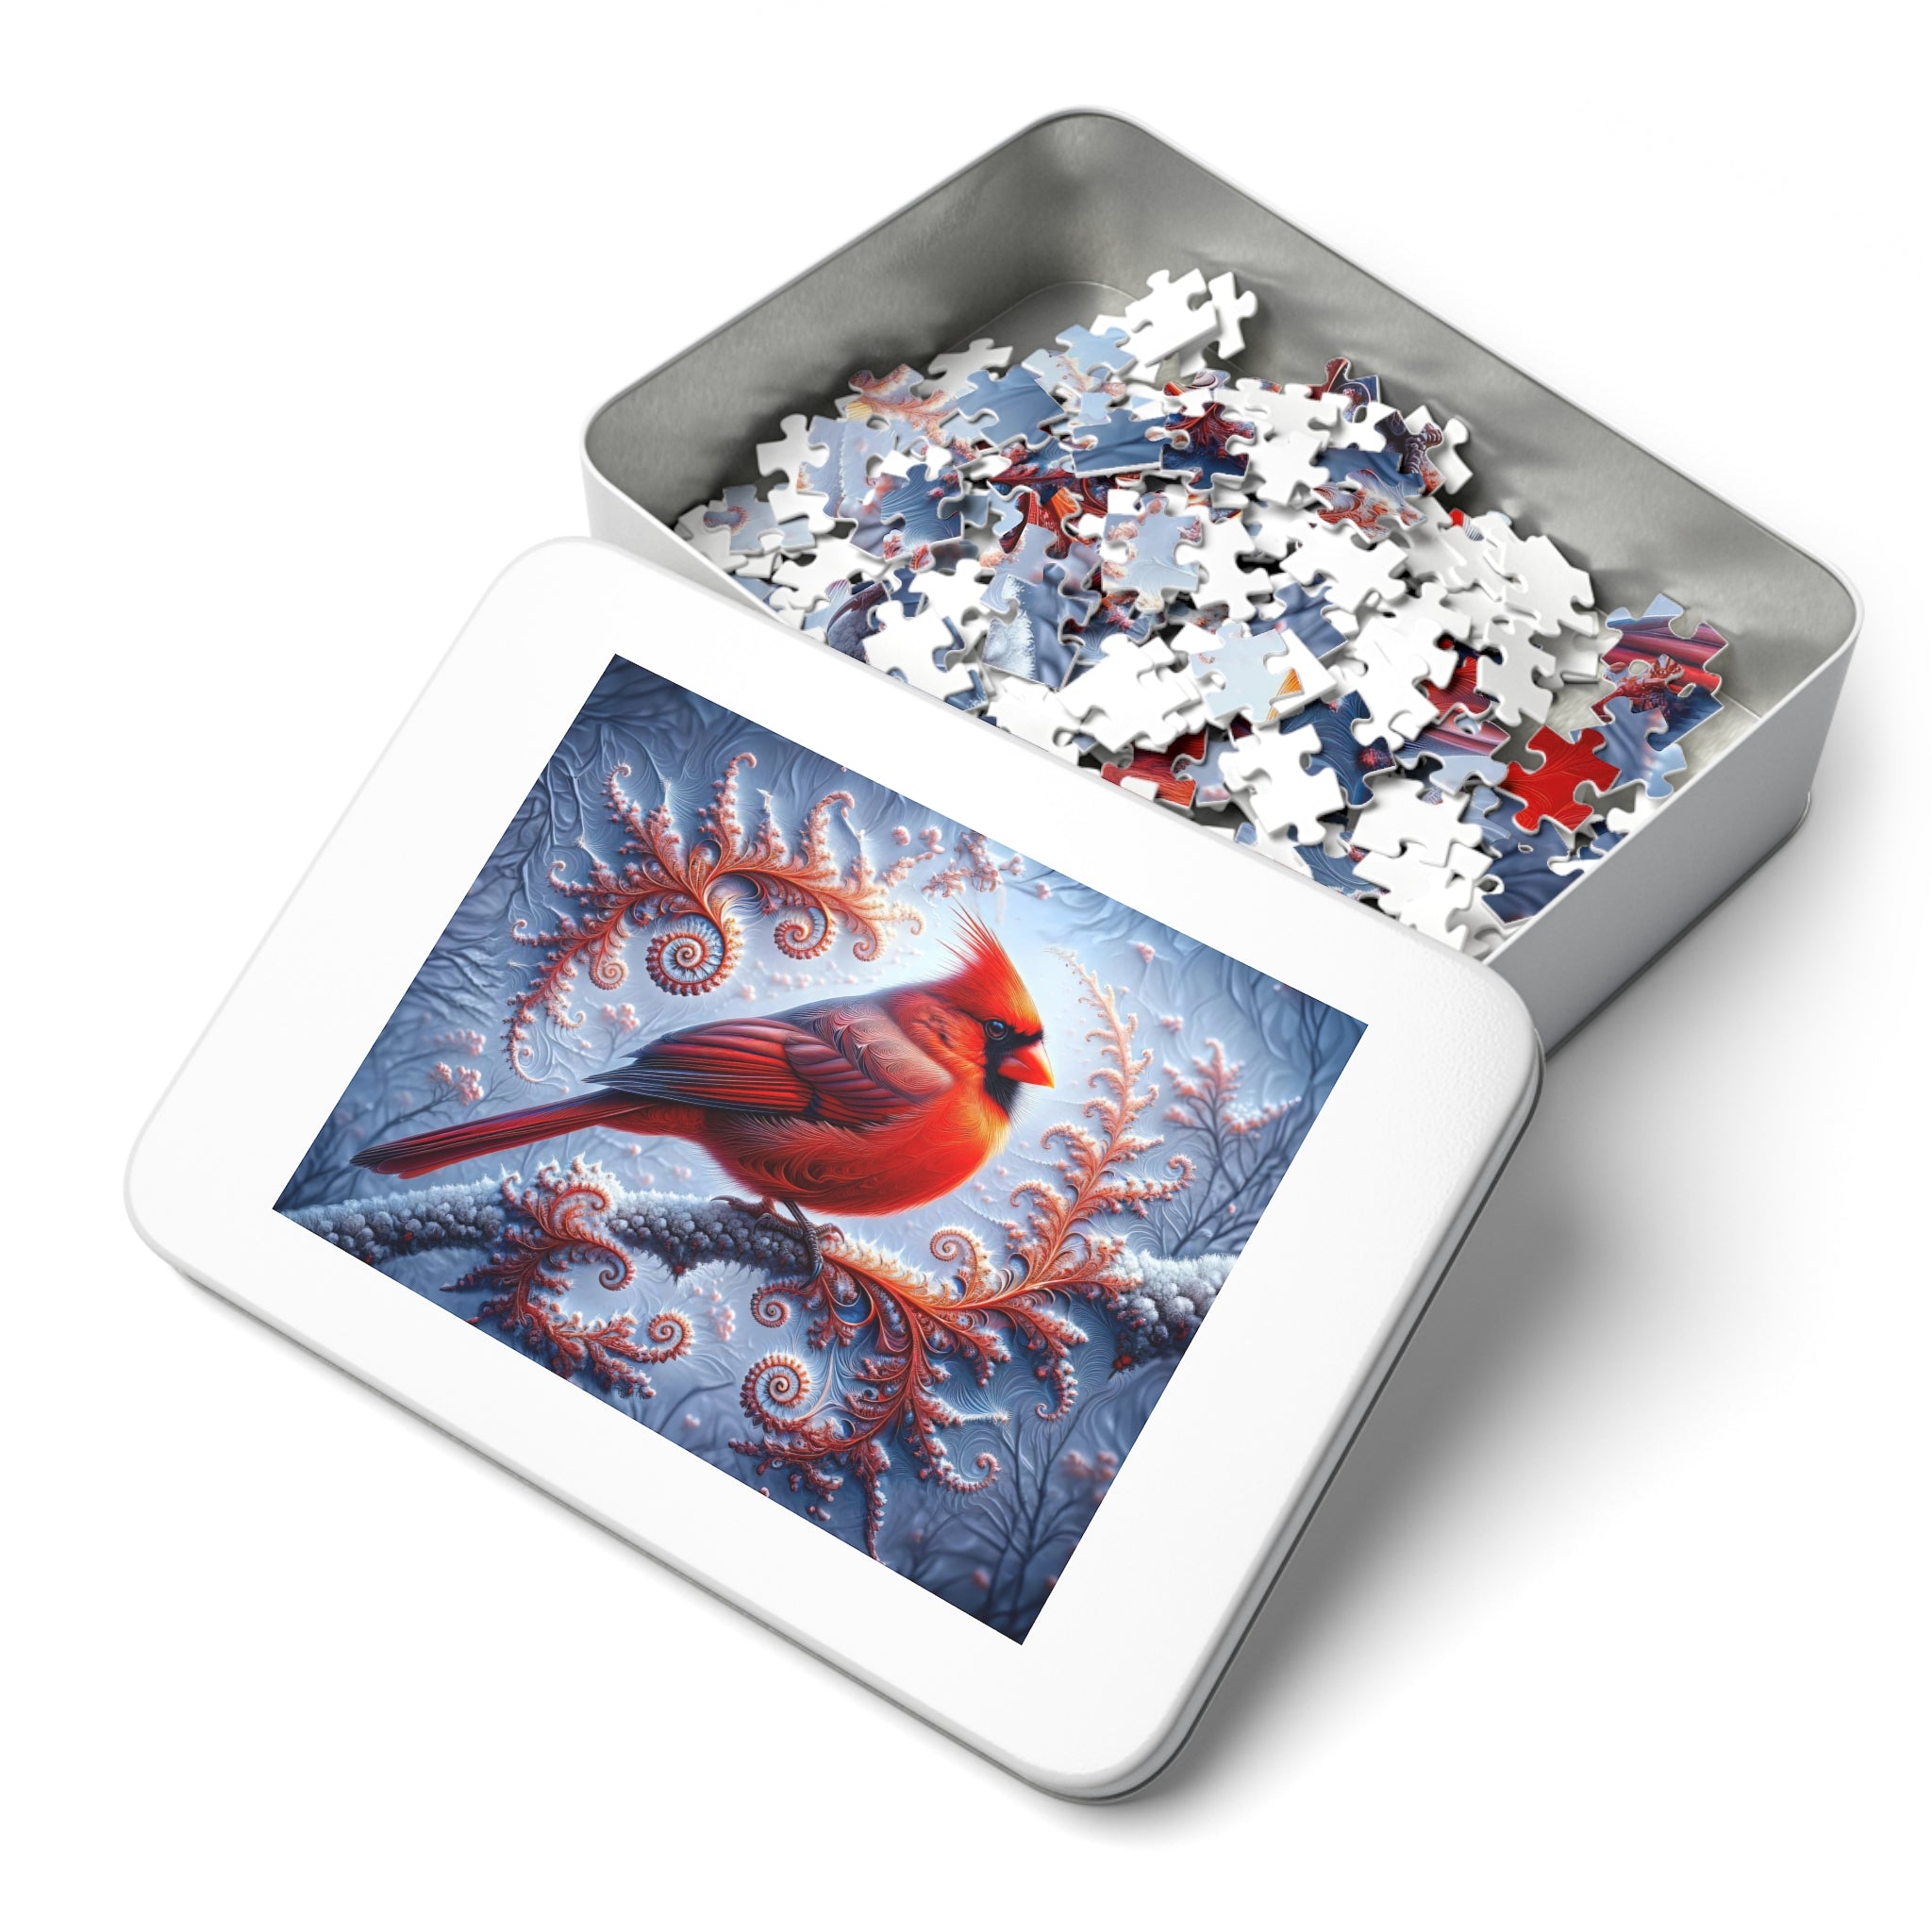 The Cardinal's Fractal Winter Jigsaw Puzzle